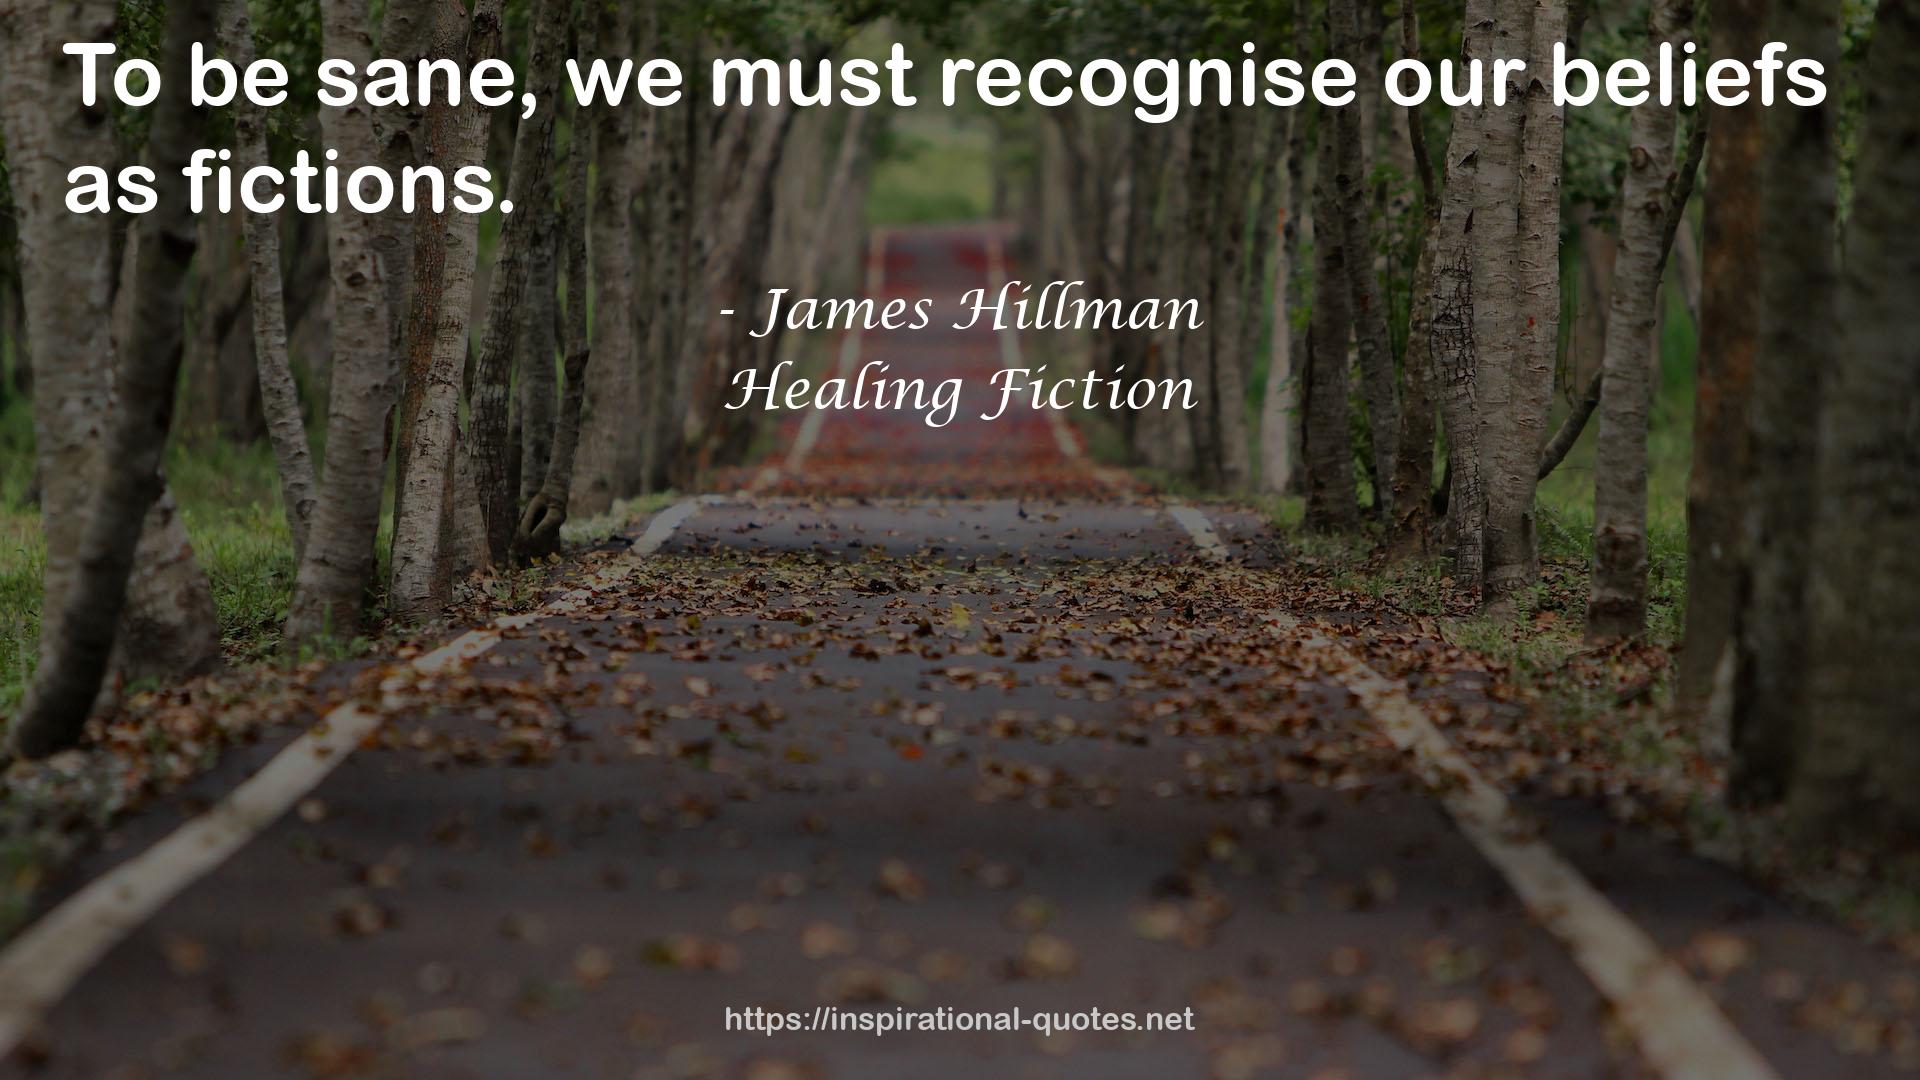 Healing Fiction QUOTES